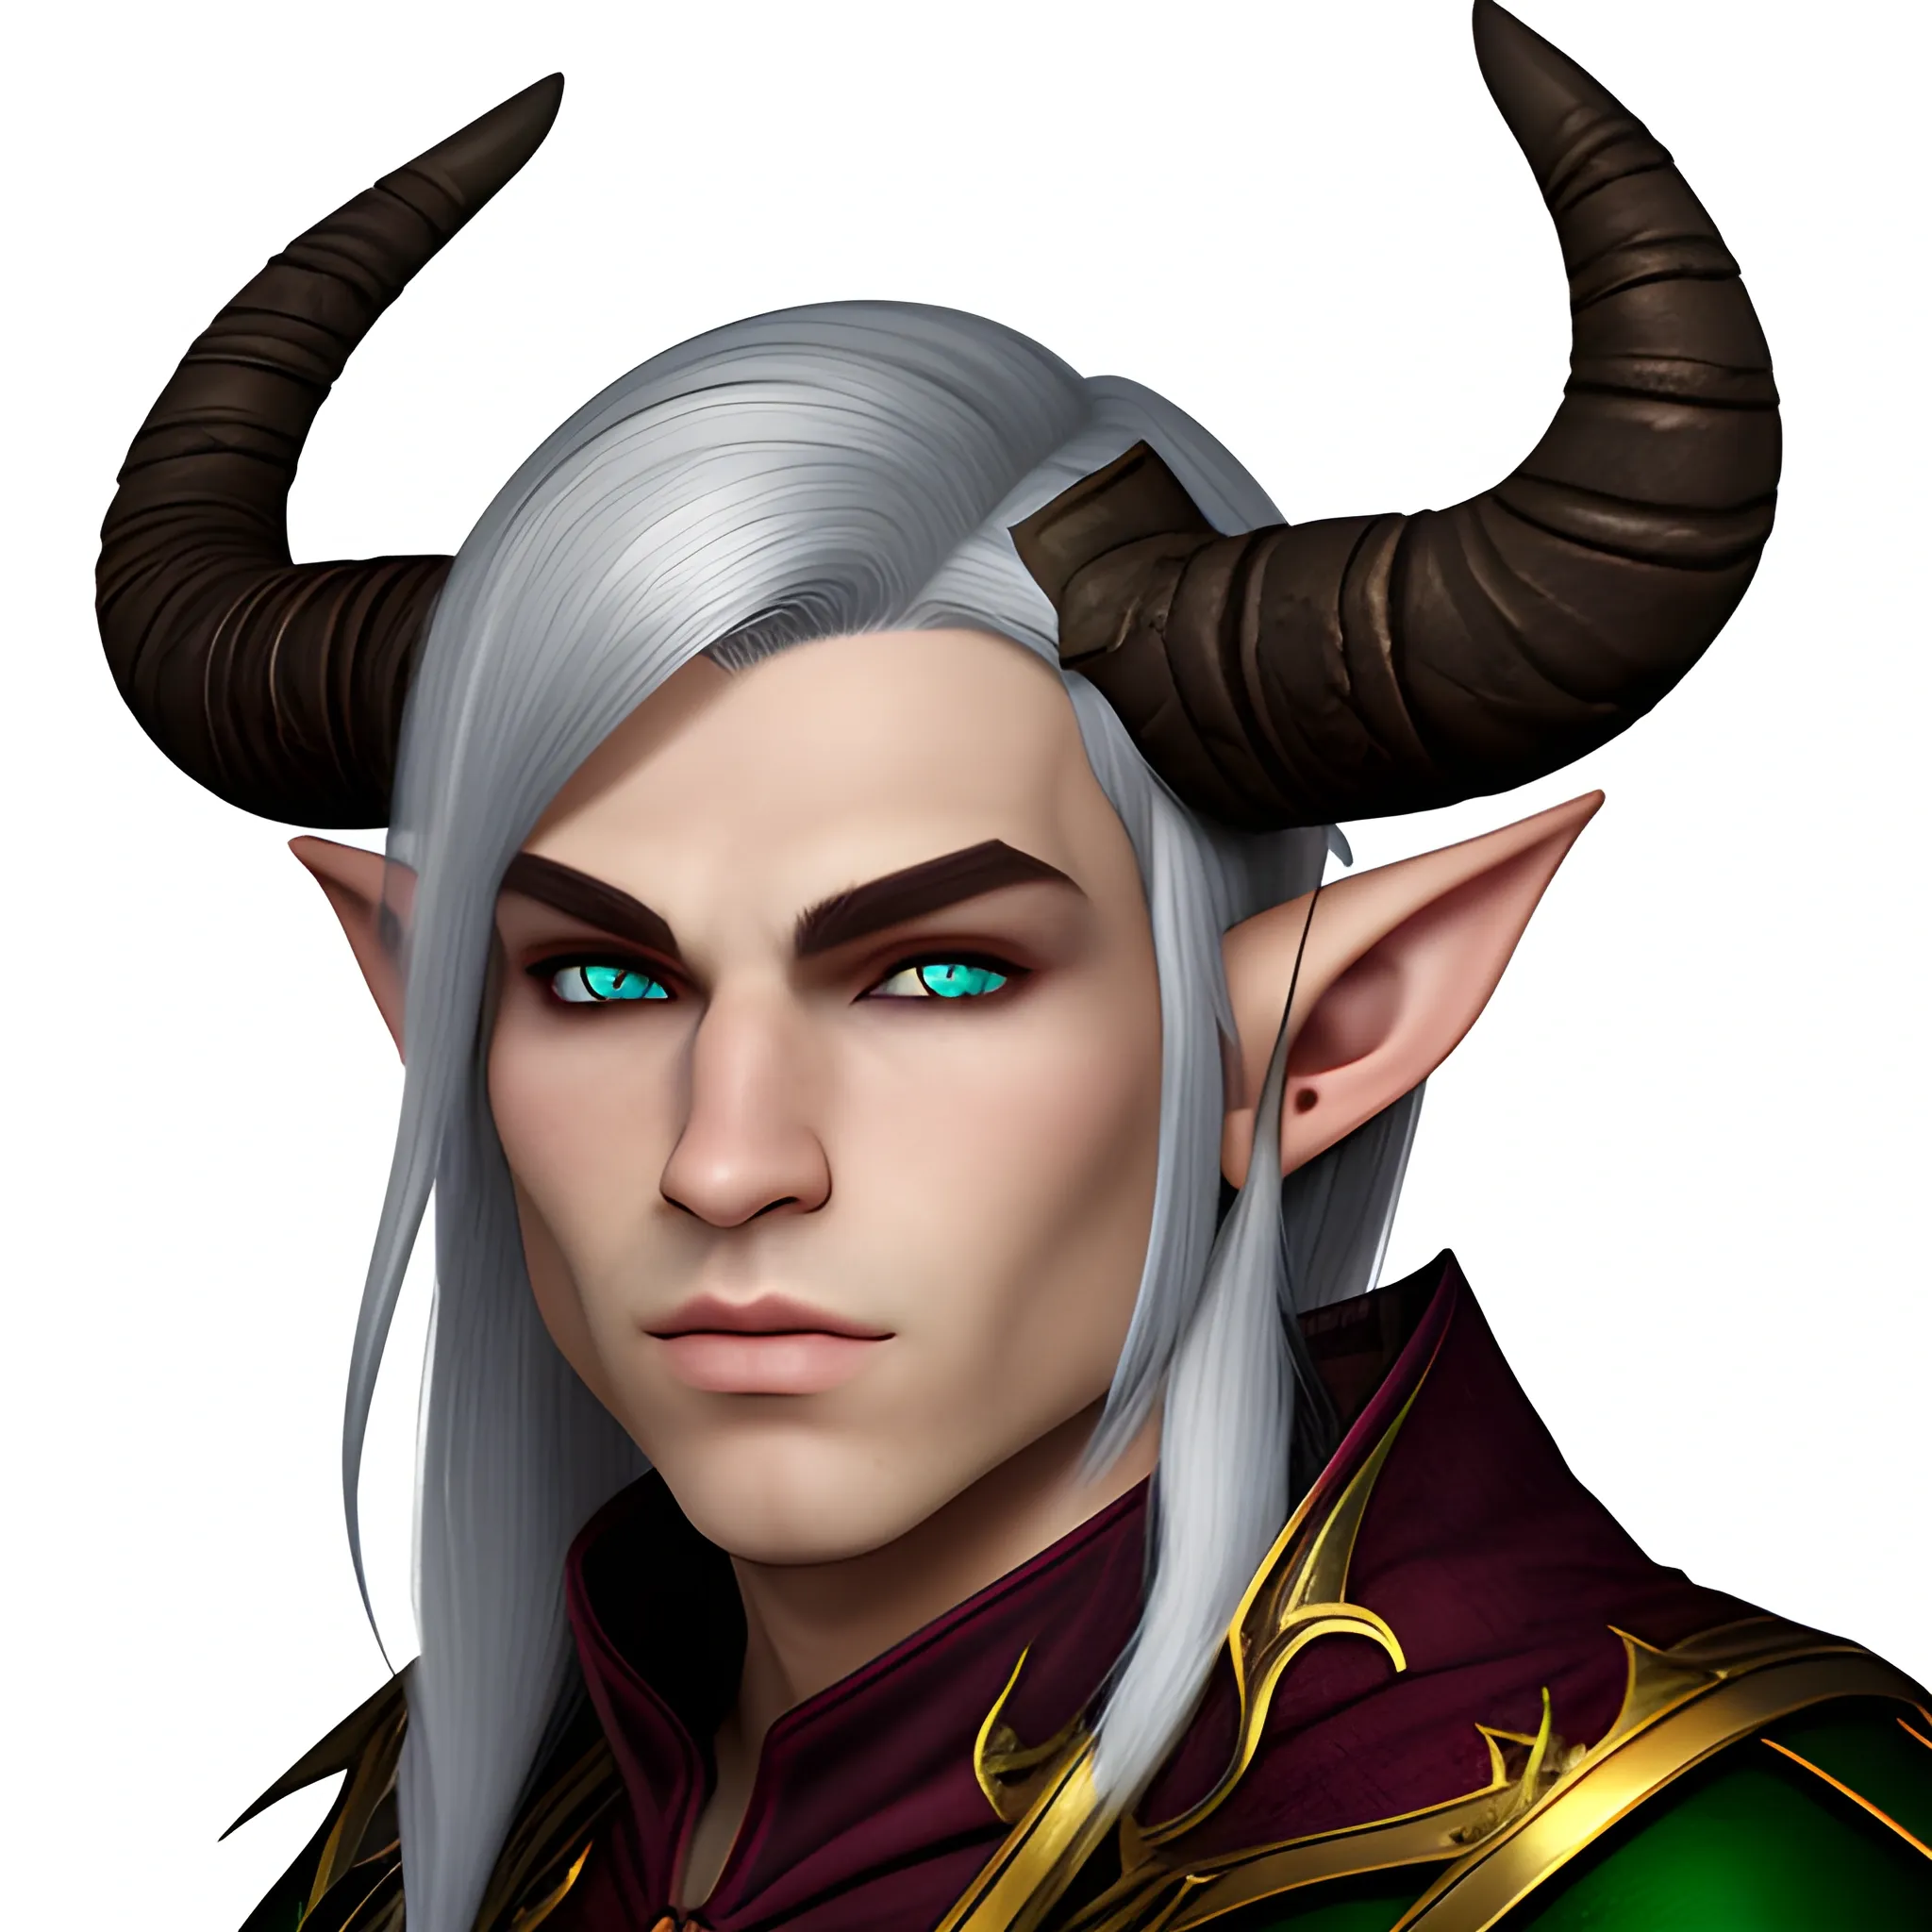  male elf with horns